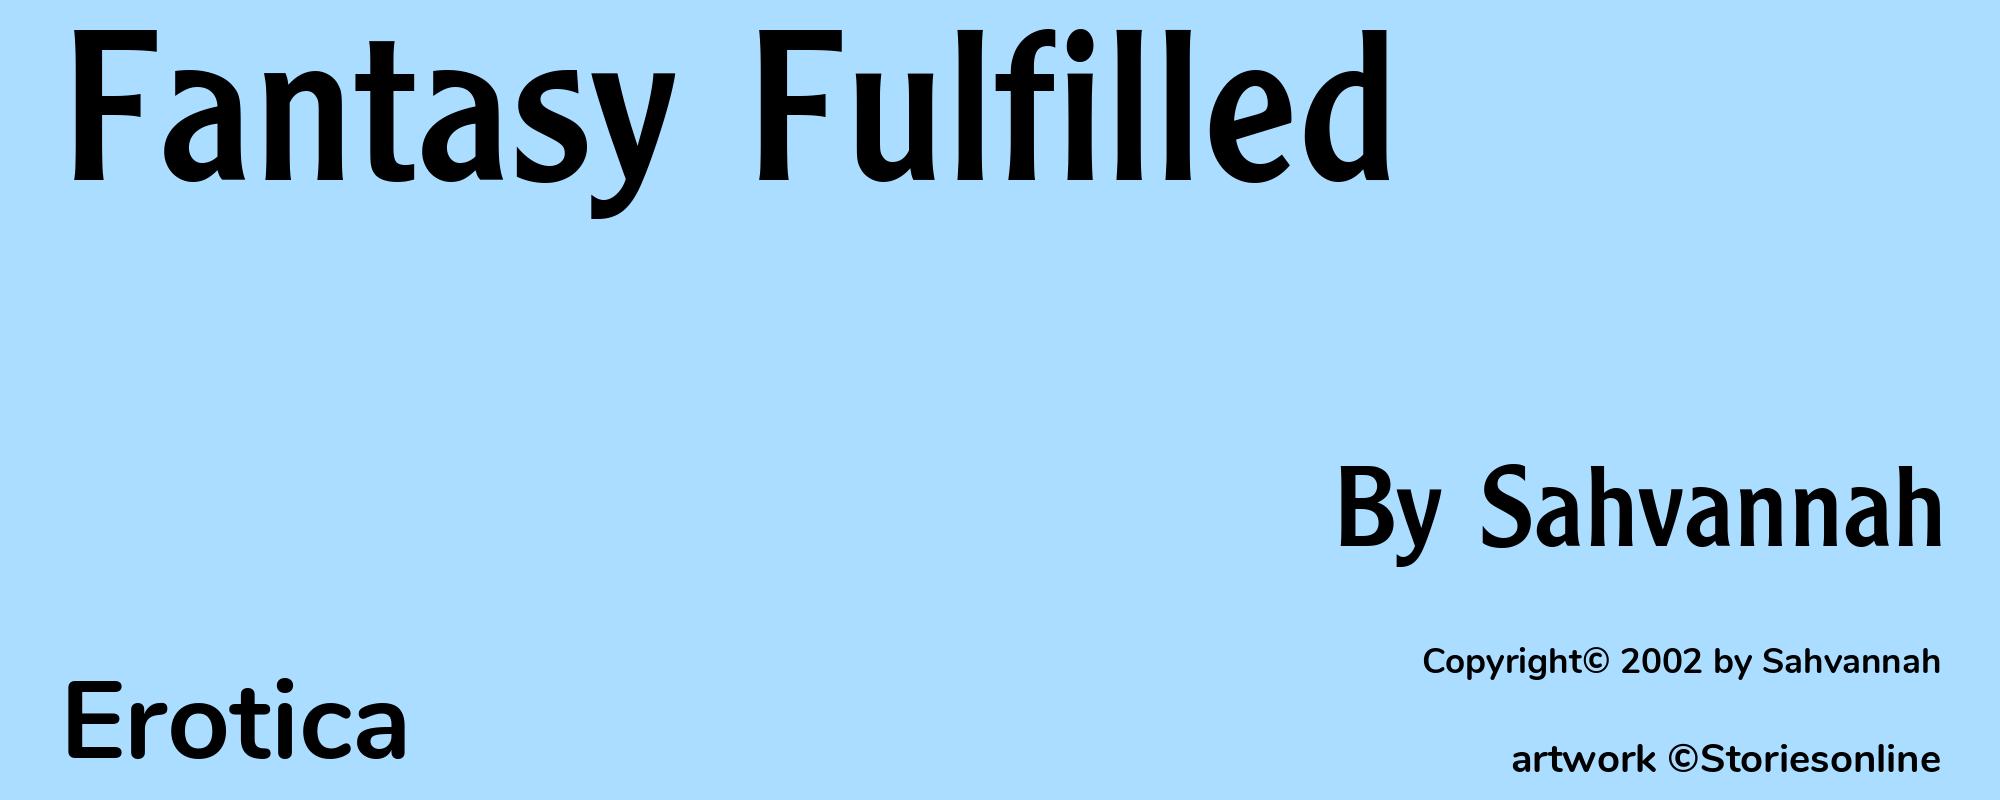 Fantasy Fulfilled - Cover